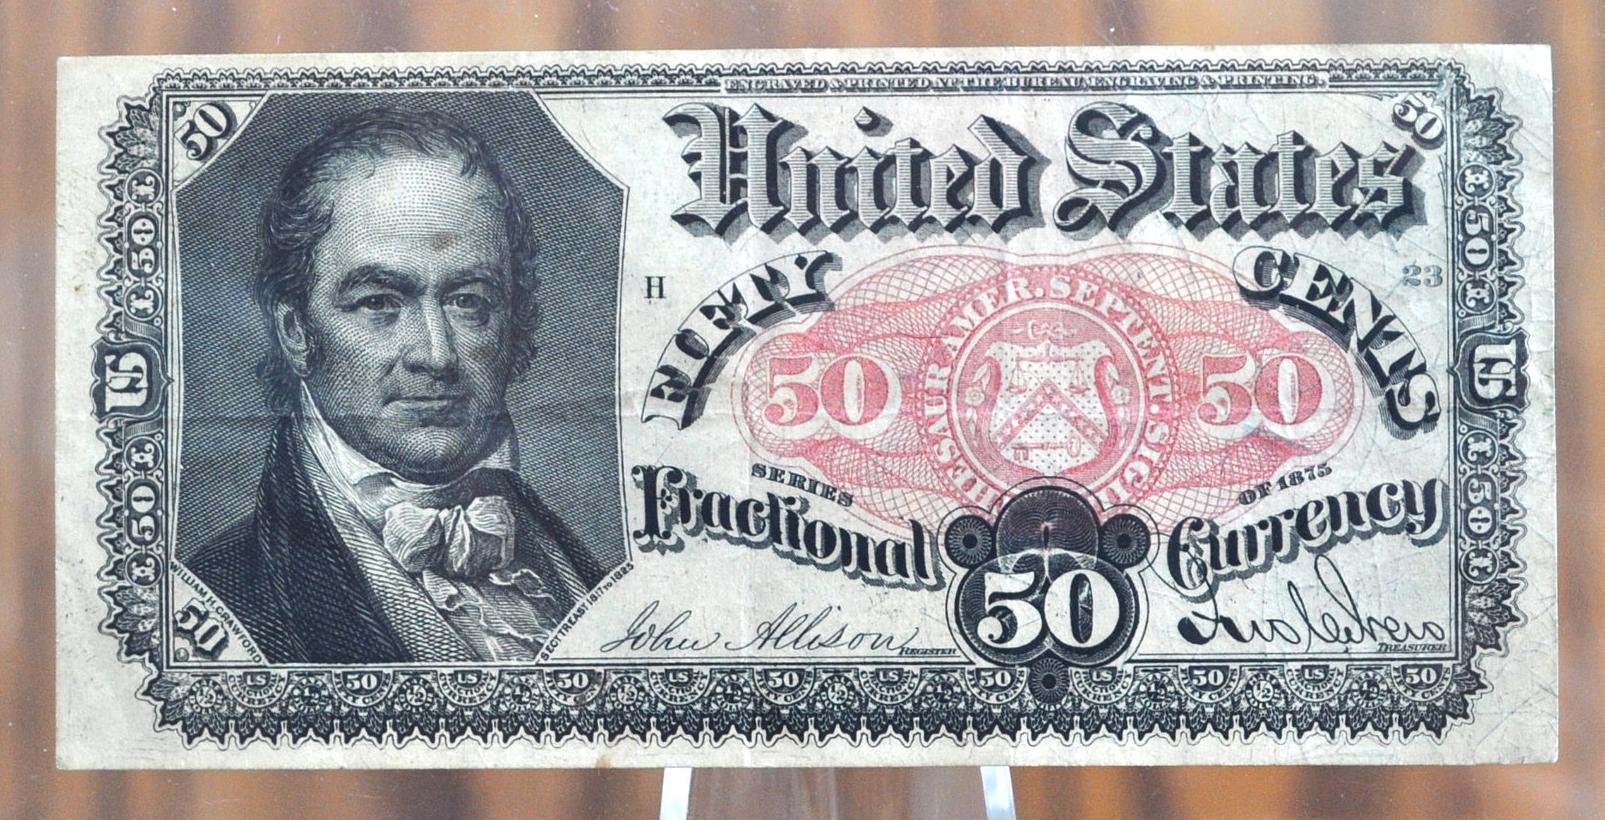 Fifth Issue 50 Cent Fractional Note 1875 - VF (Very Fine) Grade / Condition - 5th Issue Fifty Cent Note Fractional Note Fr1381, Authentic